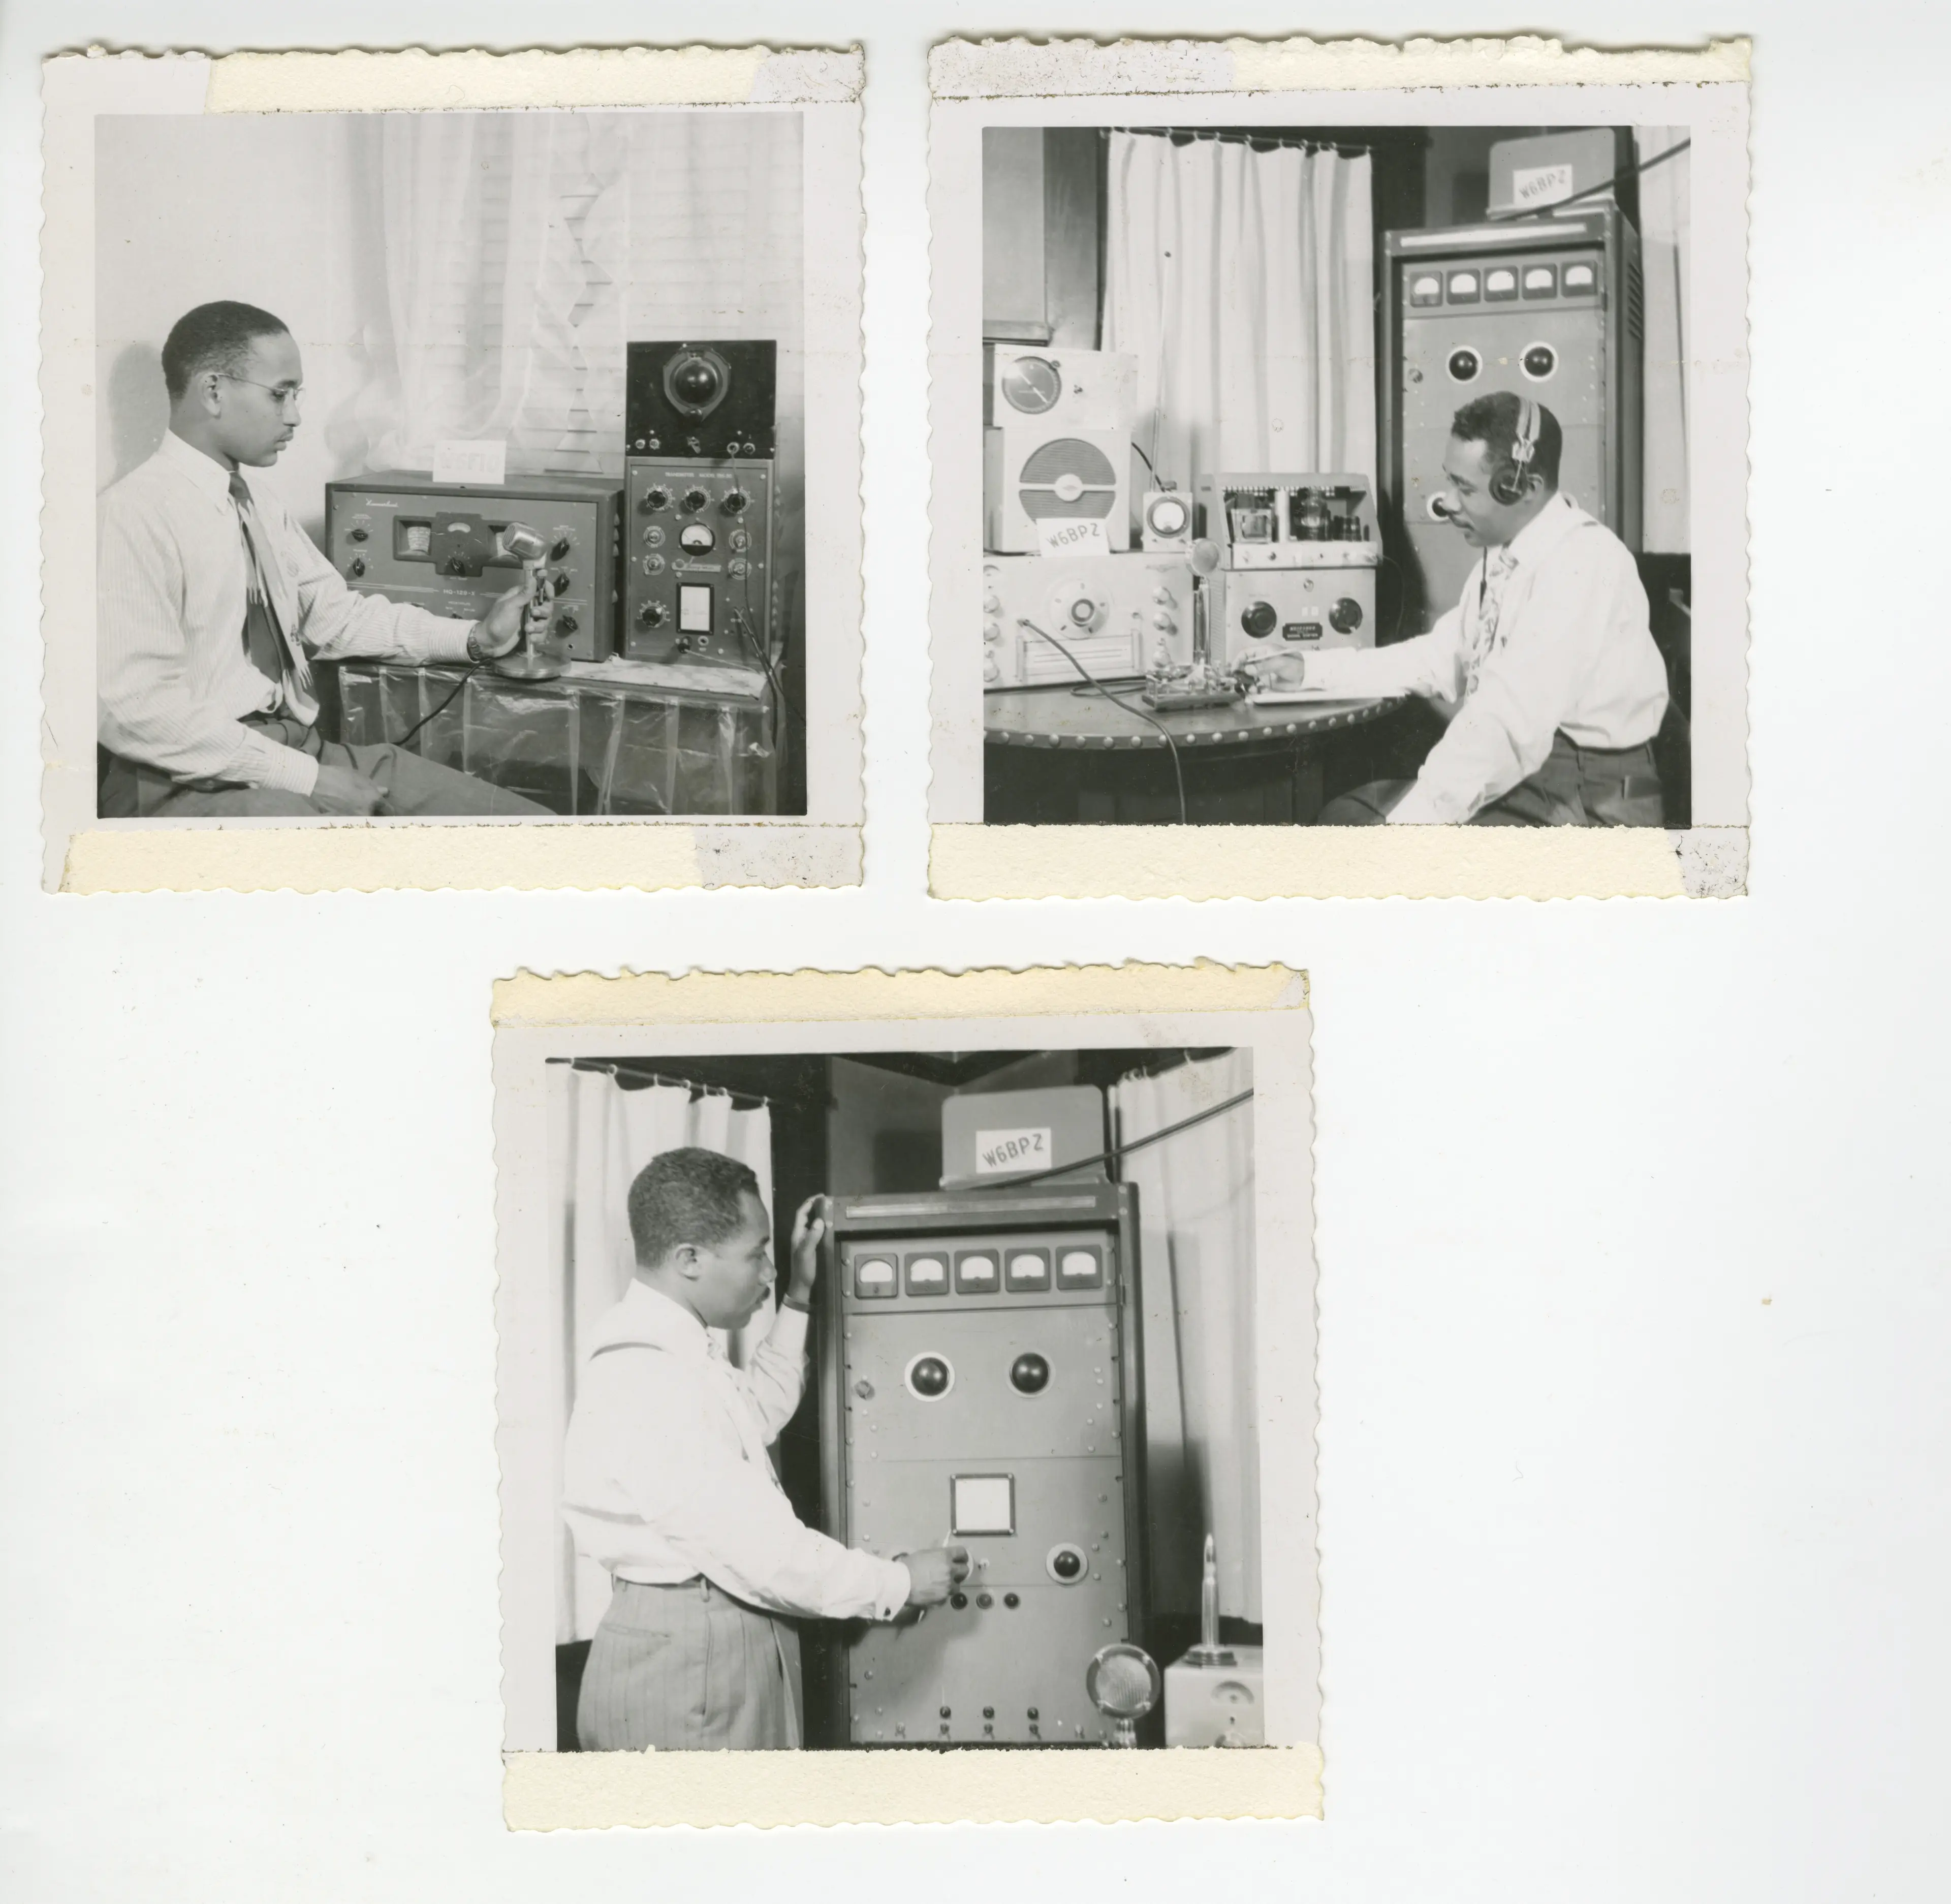 Three old black and white pictures, each with a black male radio operator with white collared shirts and a tie